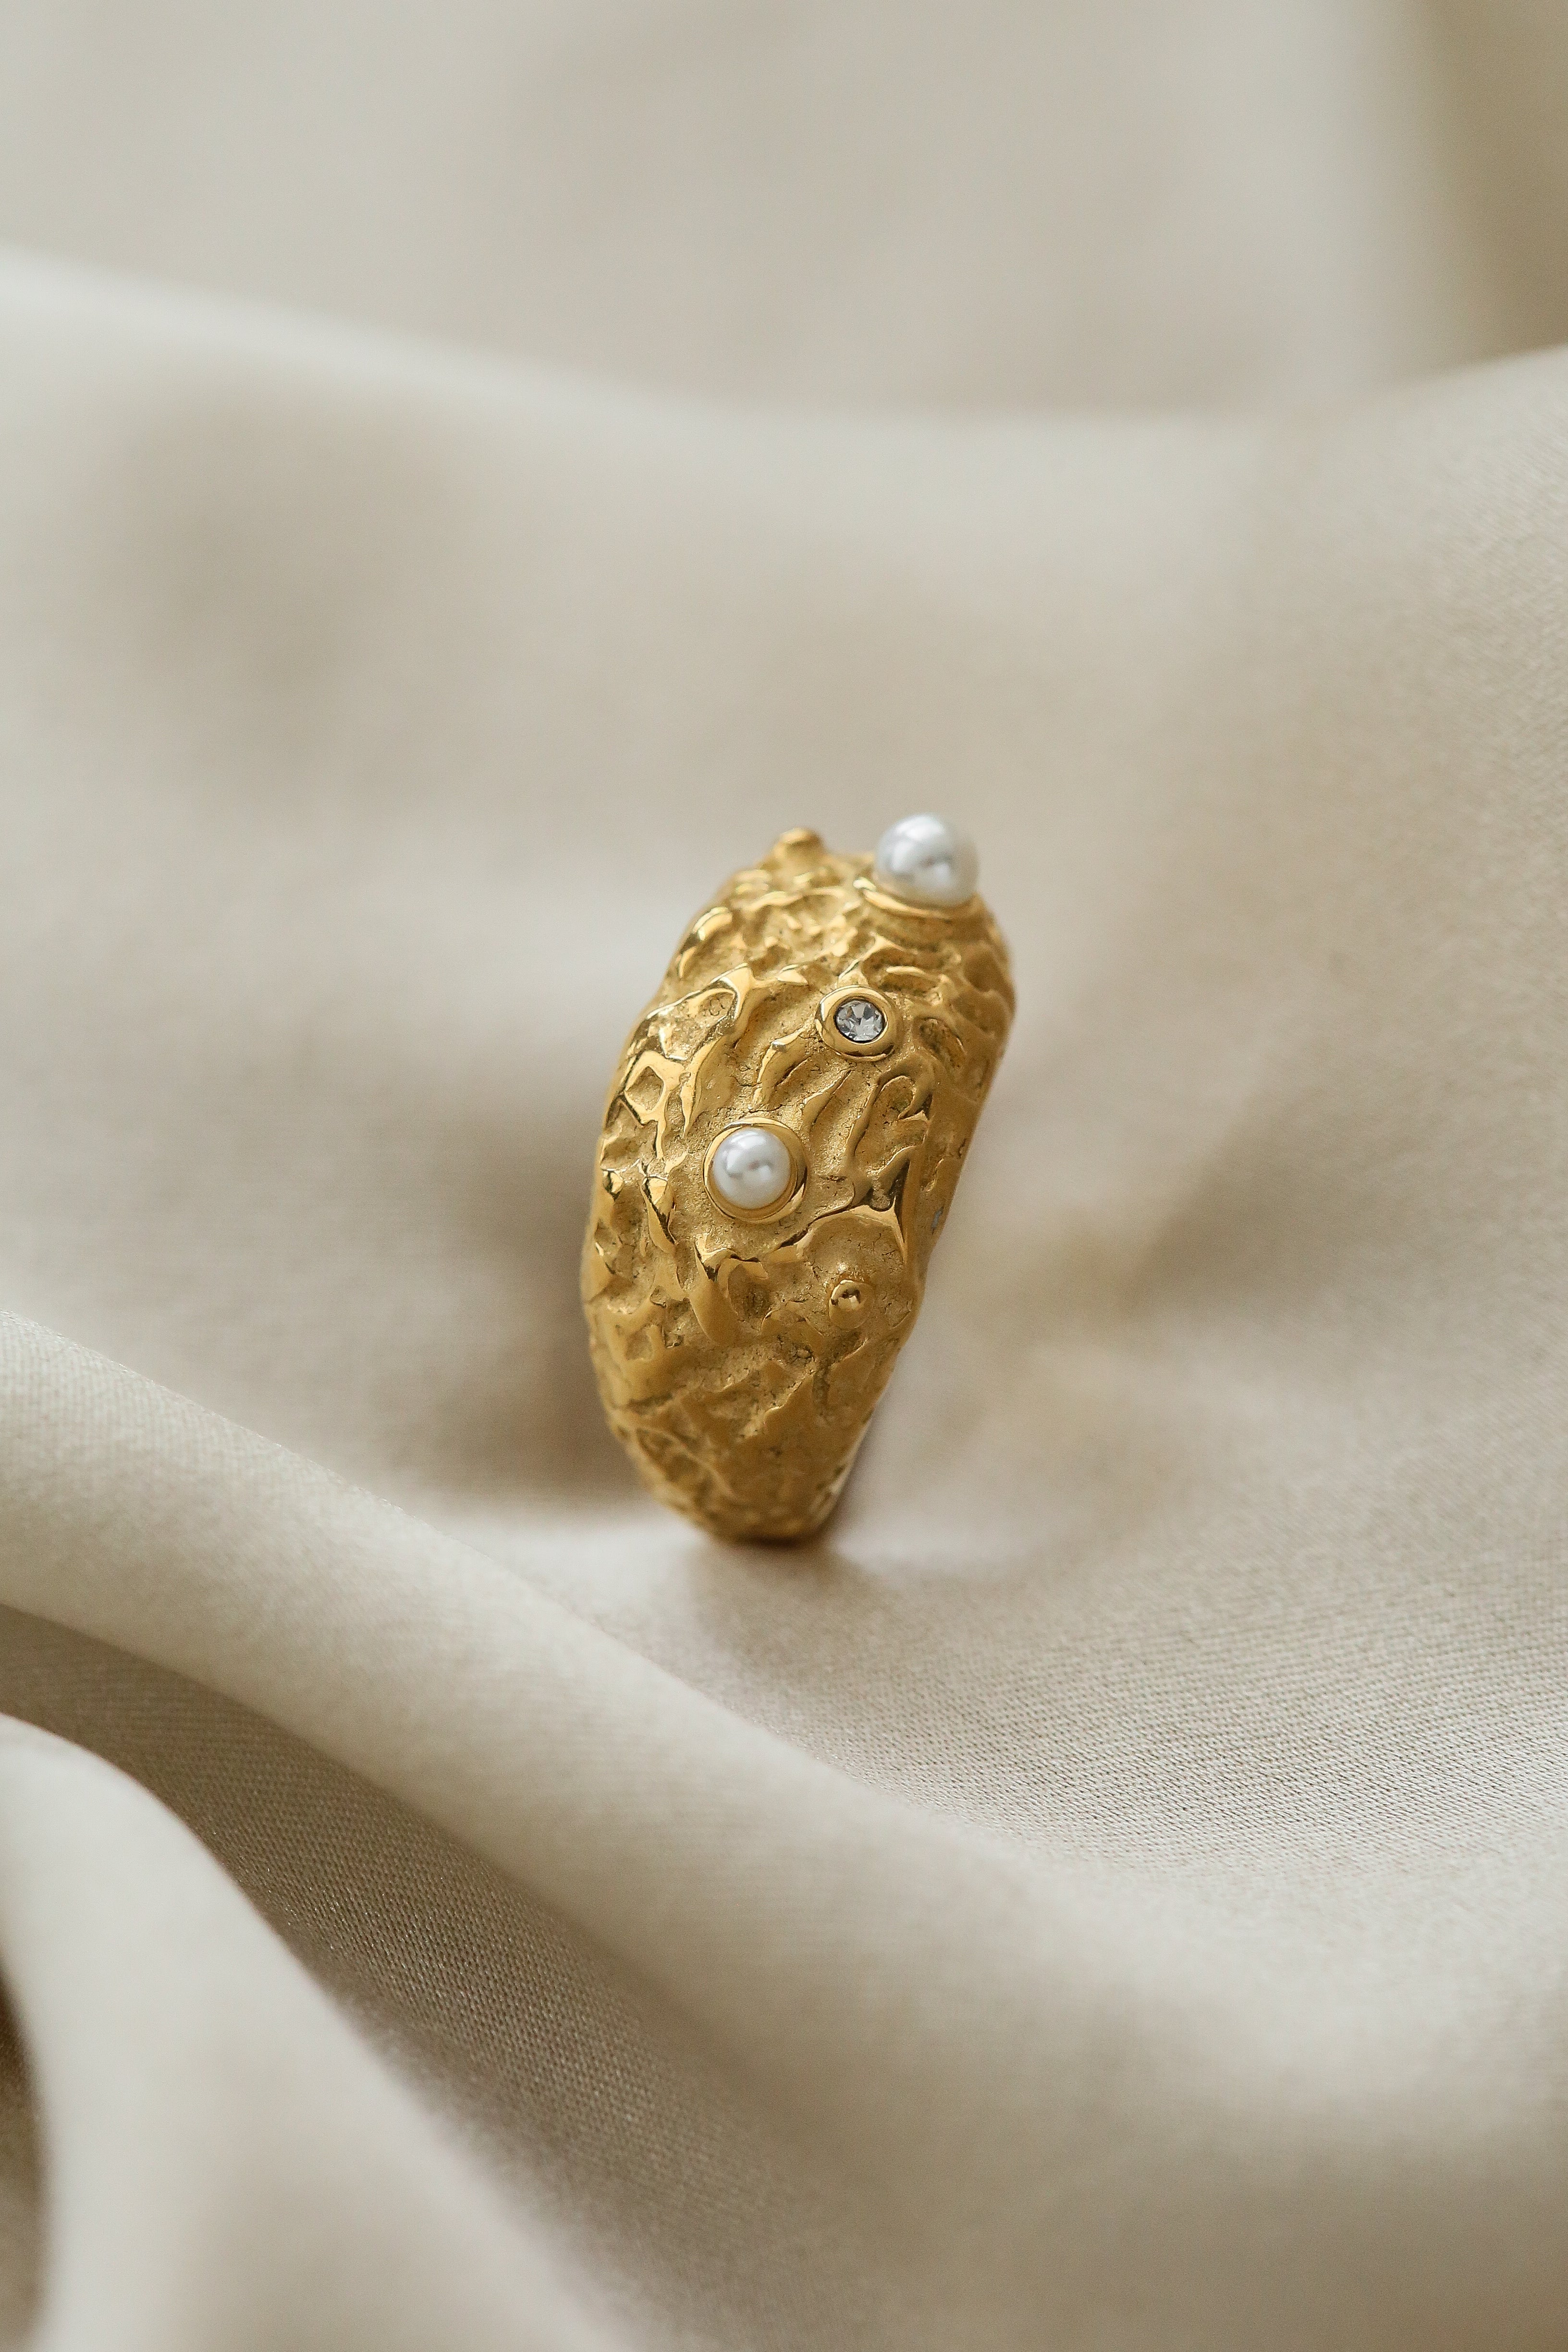 Walde Ring - Boutique Minimaliste has waterproof, durable, elegant and vintage inspired jewelry